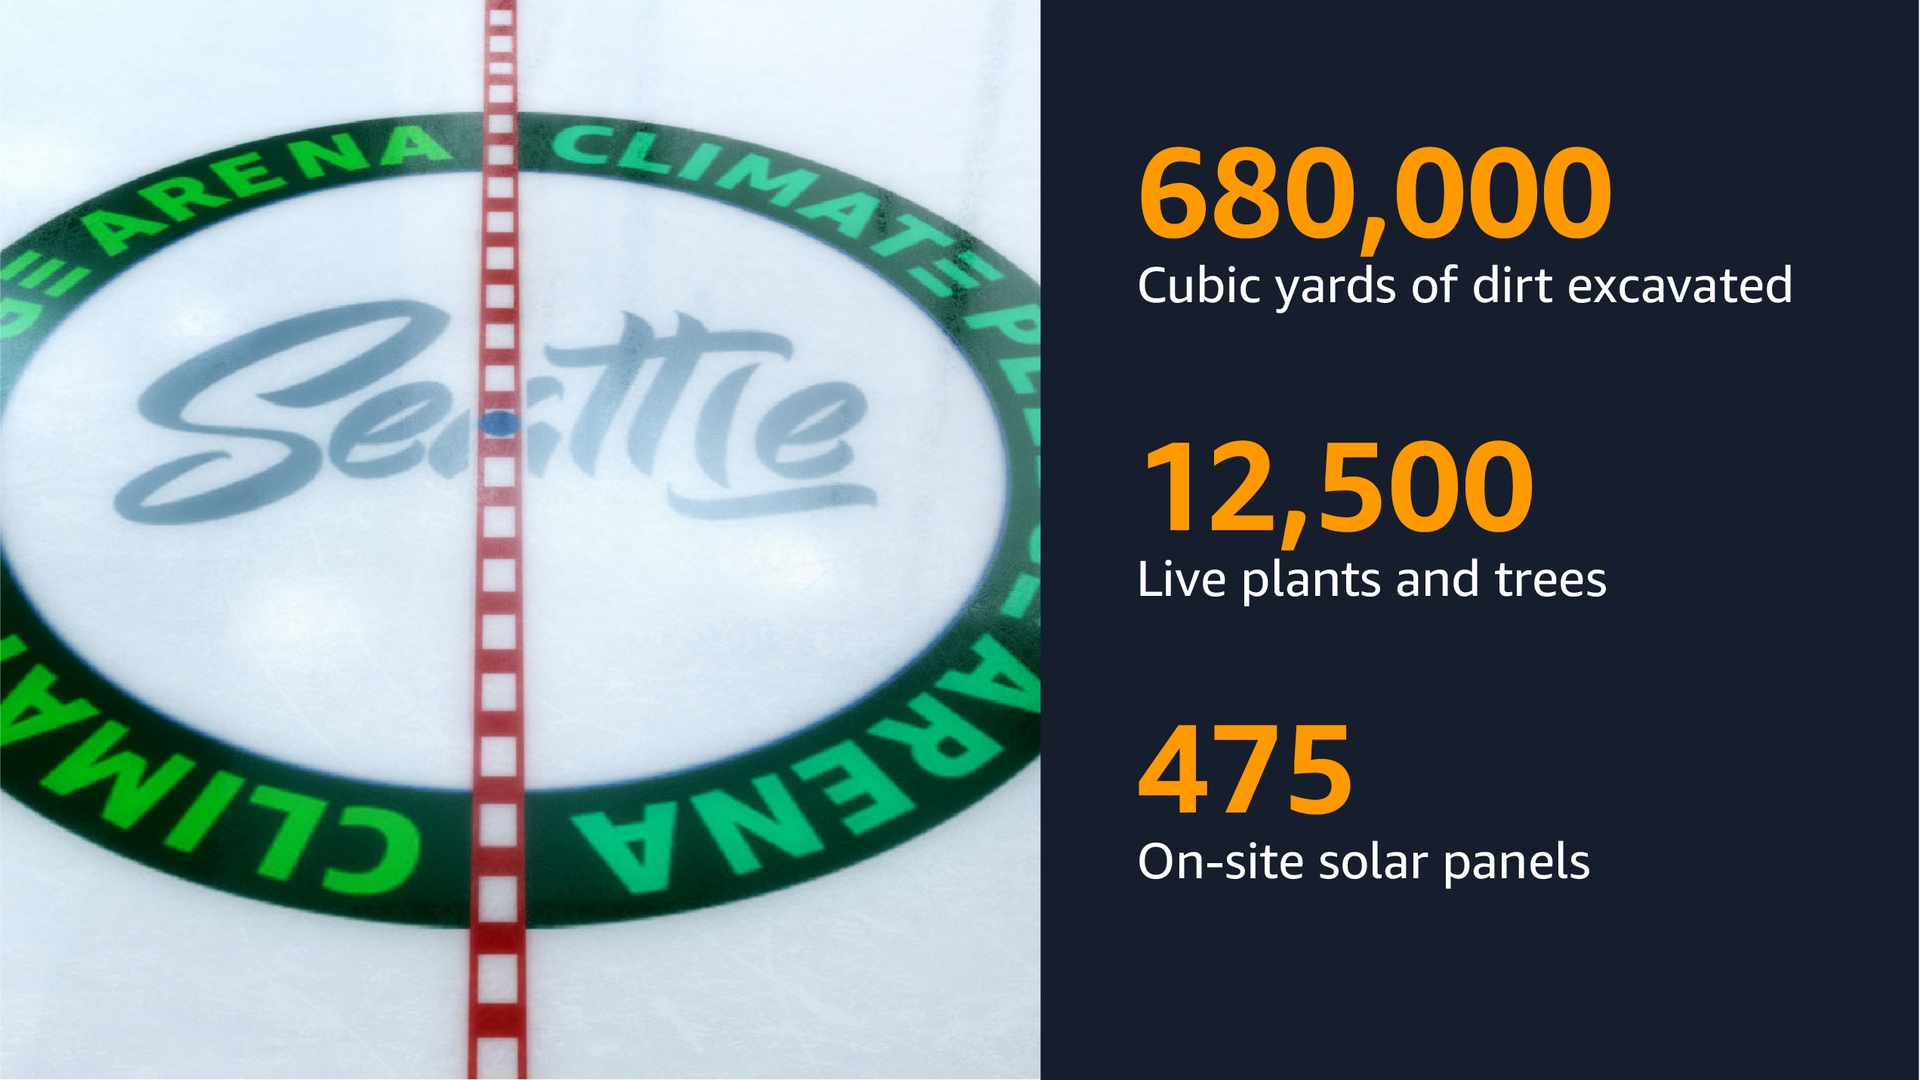 Infographic with an image from Climate Pledge Arena and data points about the venue, the first net-zero carbon arena in the world. 